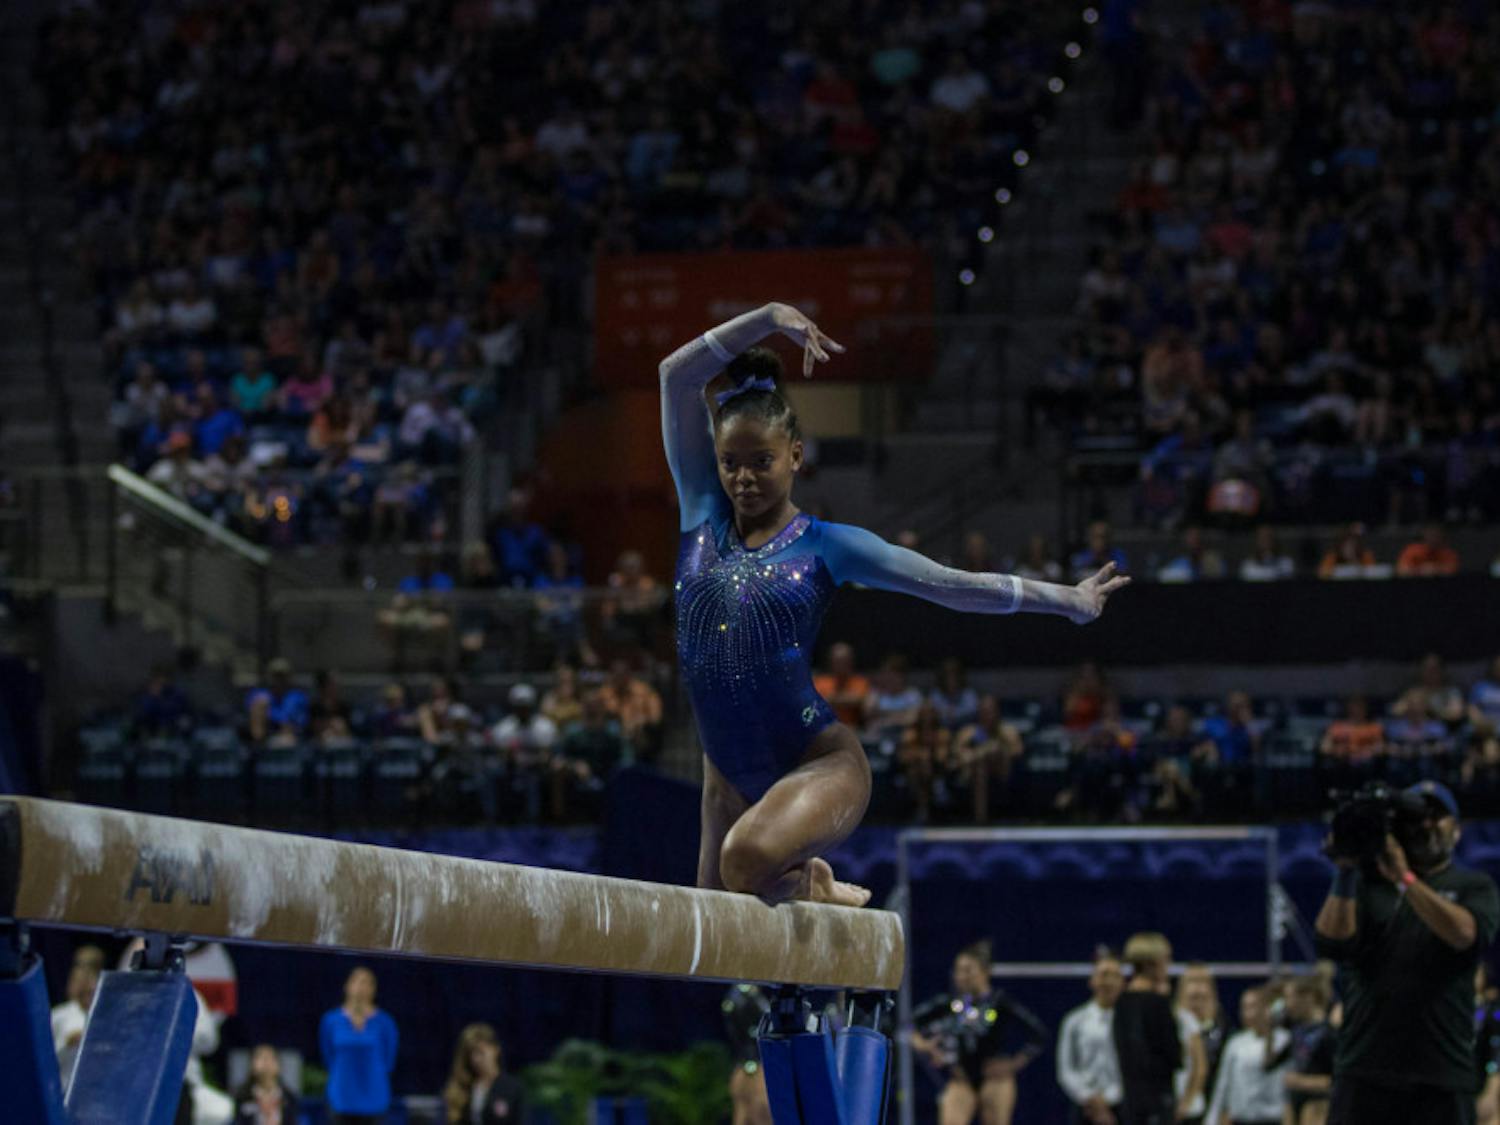 Trinity Thomas won six SEC Freshman of the Week awards and three SEC Gymnast of the Week awards during her freshman campaign at UF.